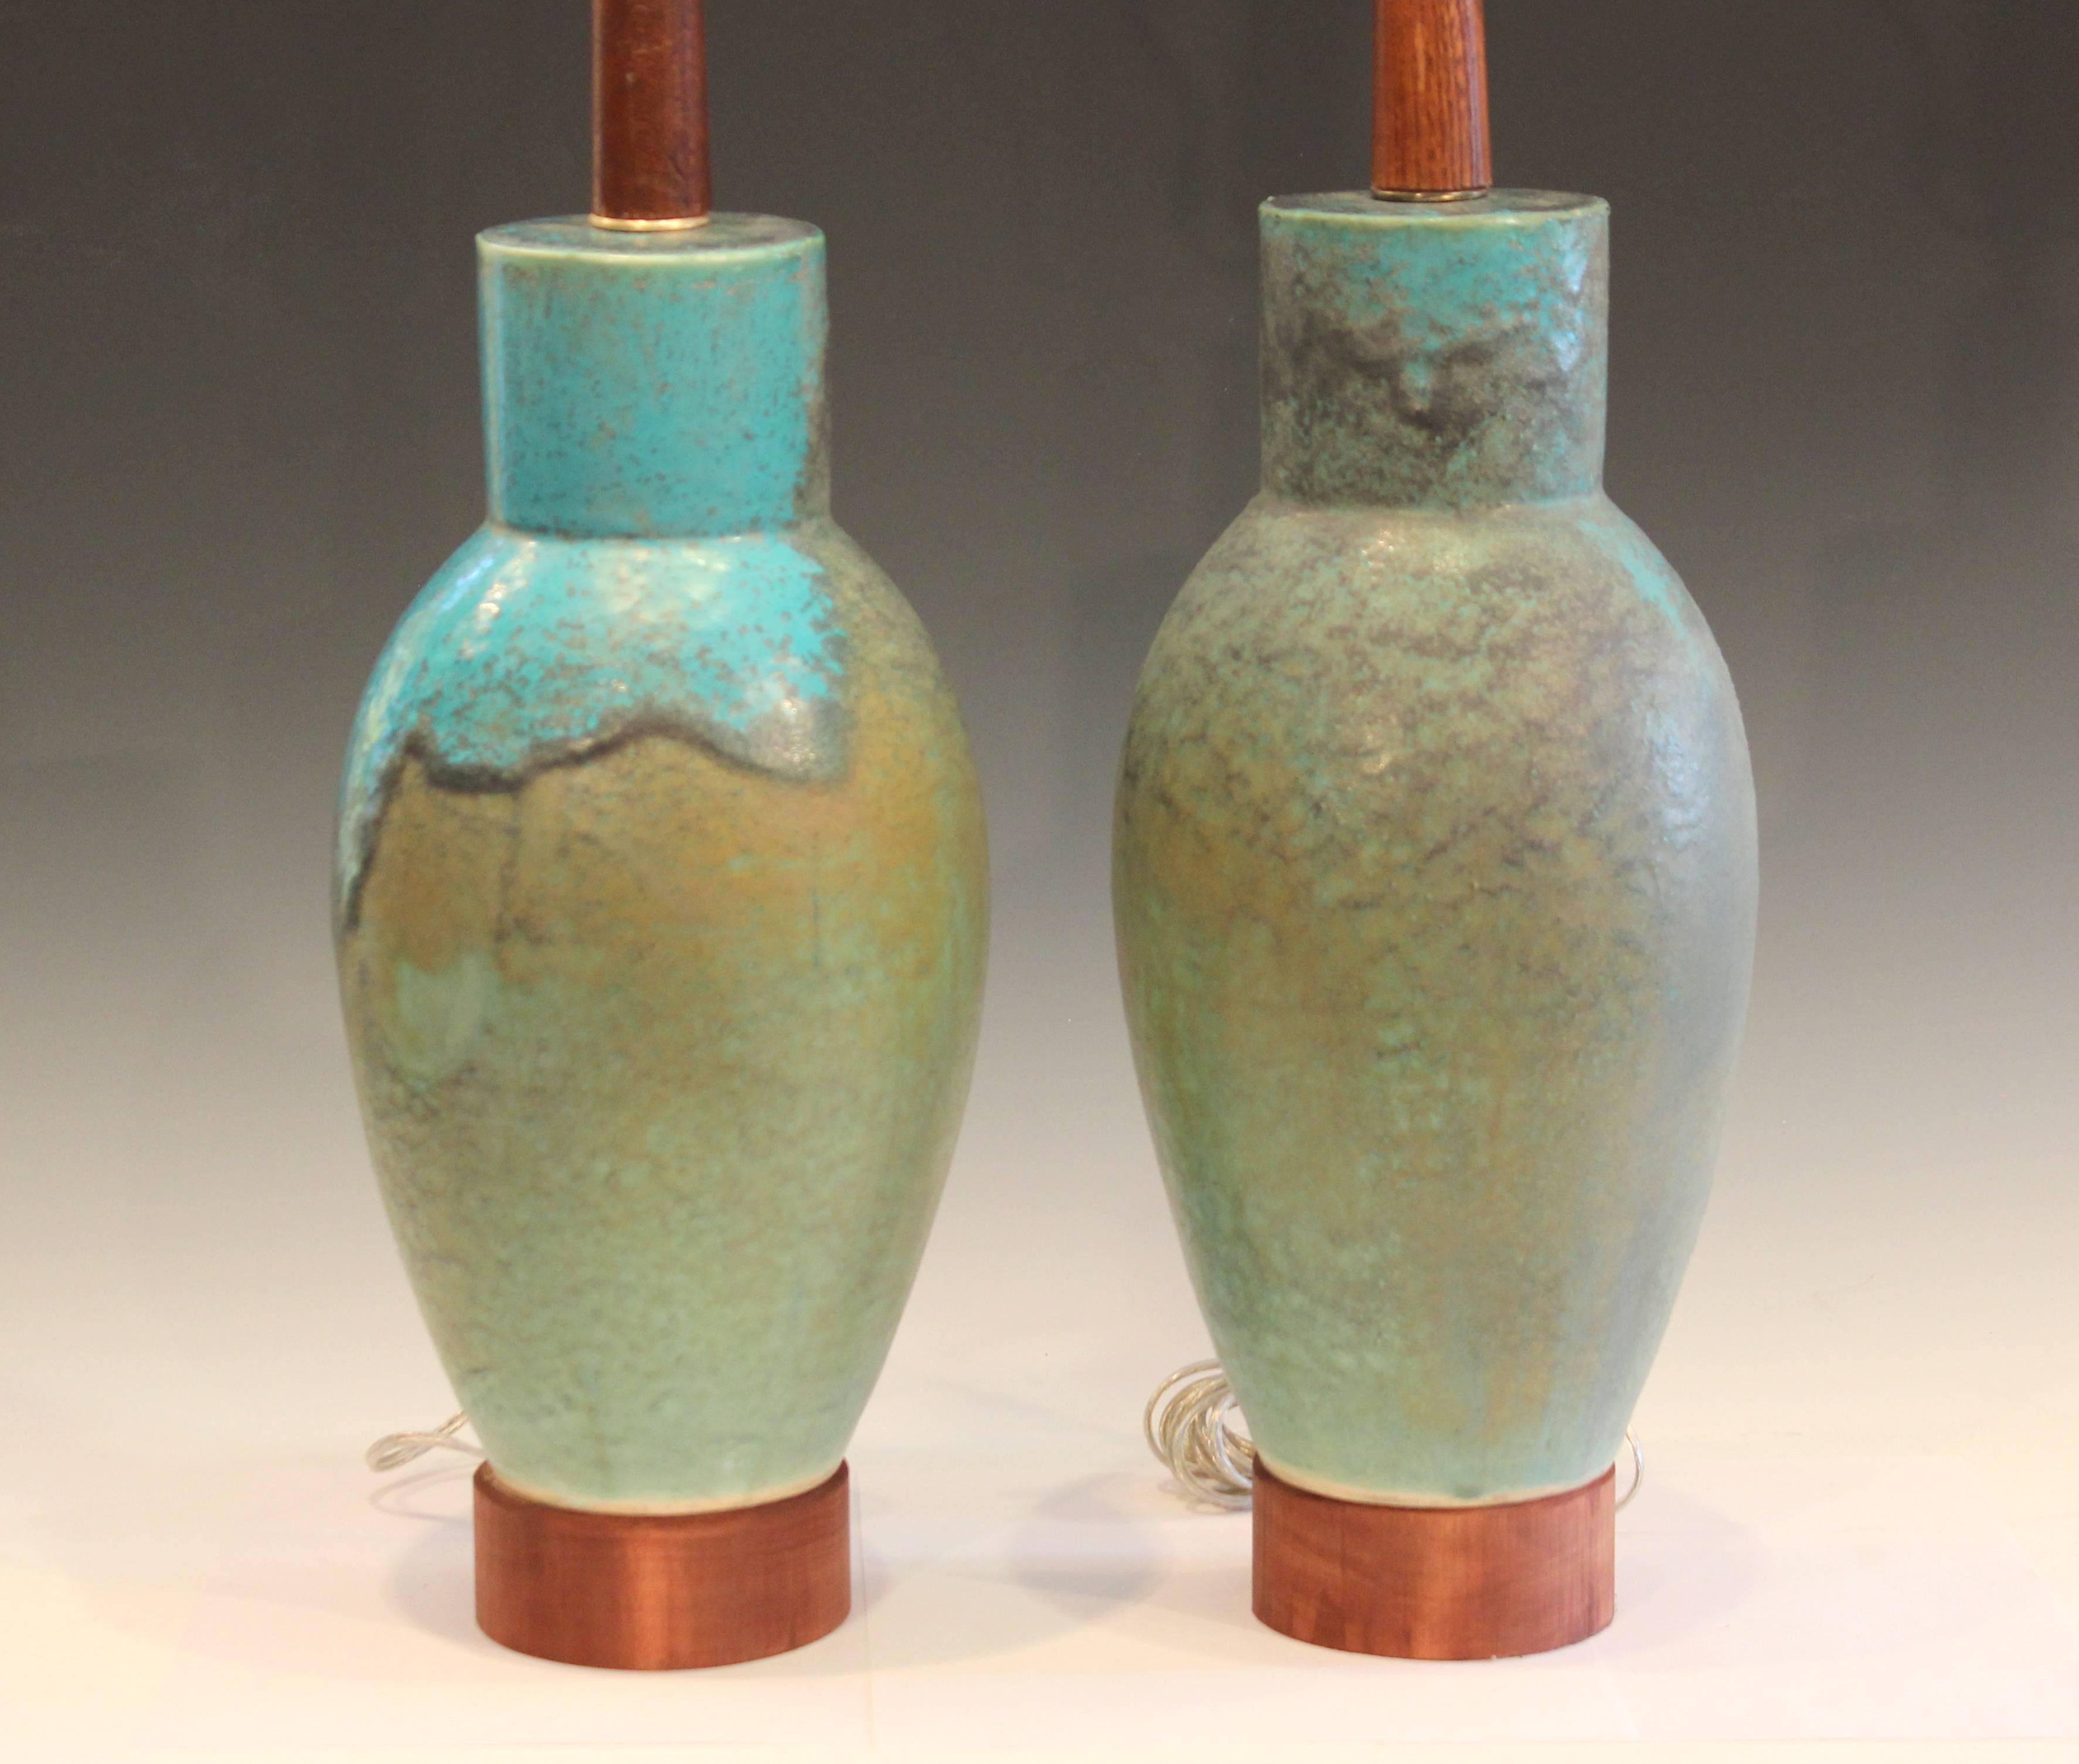 Great pair of Japanese midcentury stoneware lamps with fantastic Gallowayesque crystalline flambe glaze, circa 1950s-1960s. Measures: 31